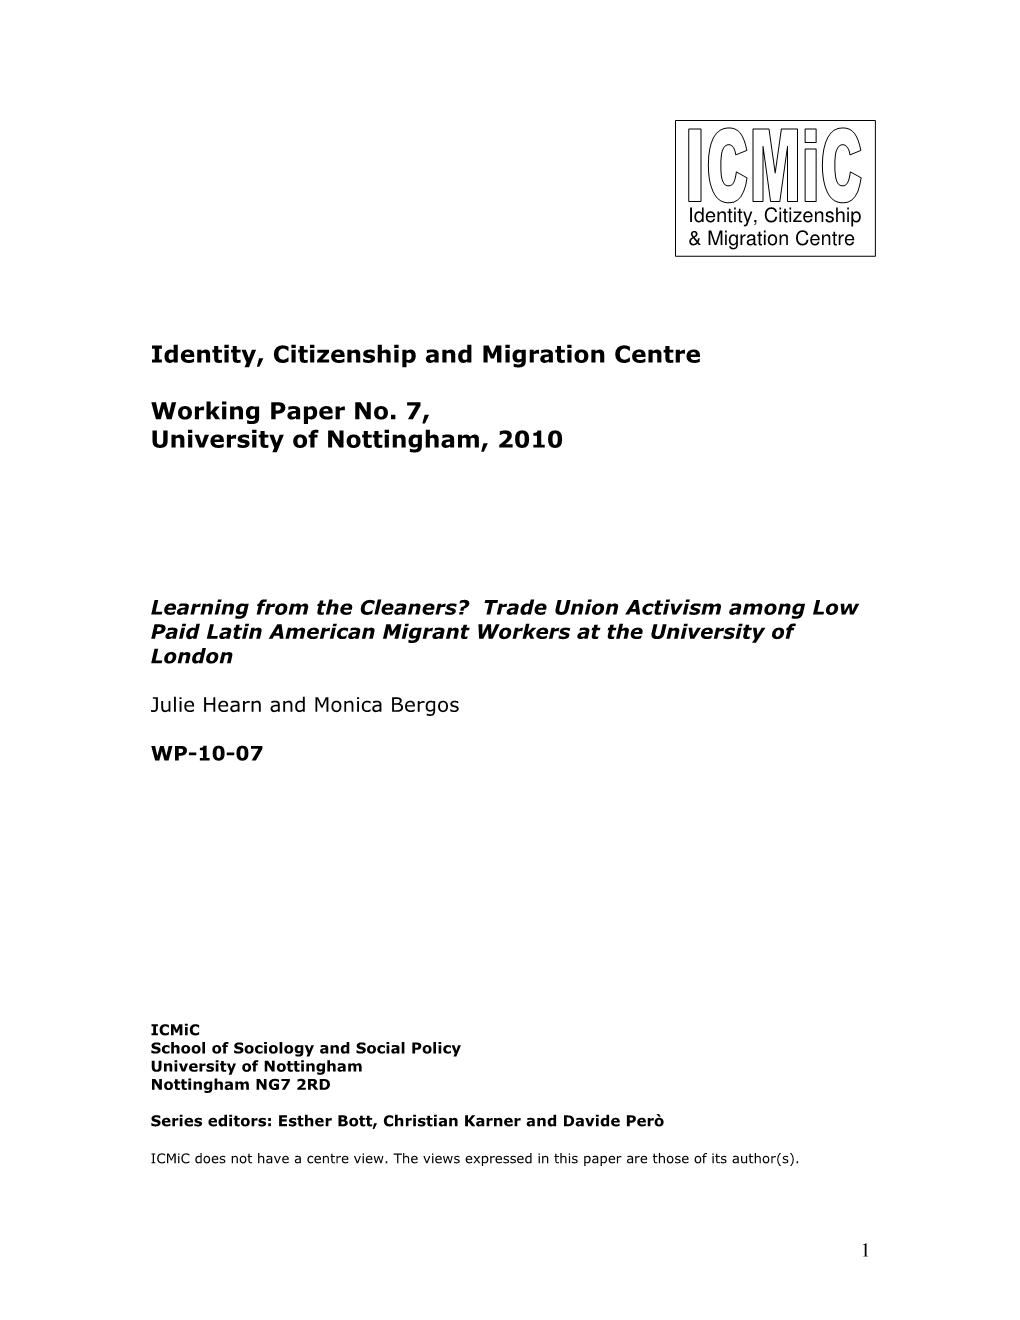 Identity, Citizenship and Migration Centre Working Paper No. 7, University of Nottingham, 2010